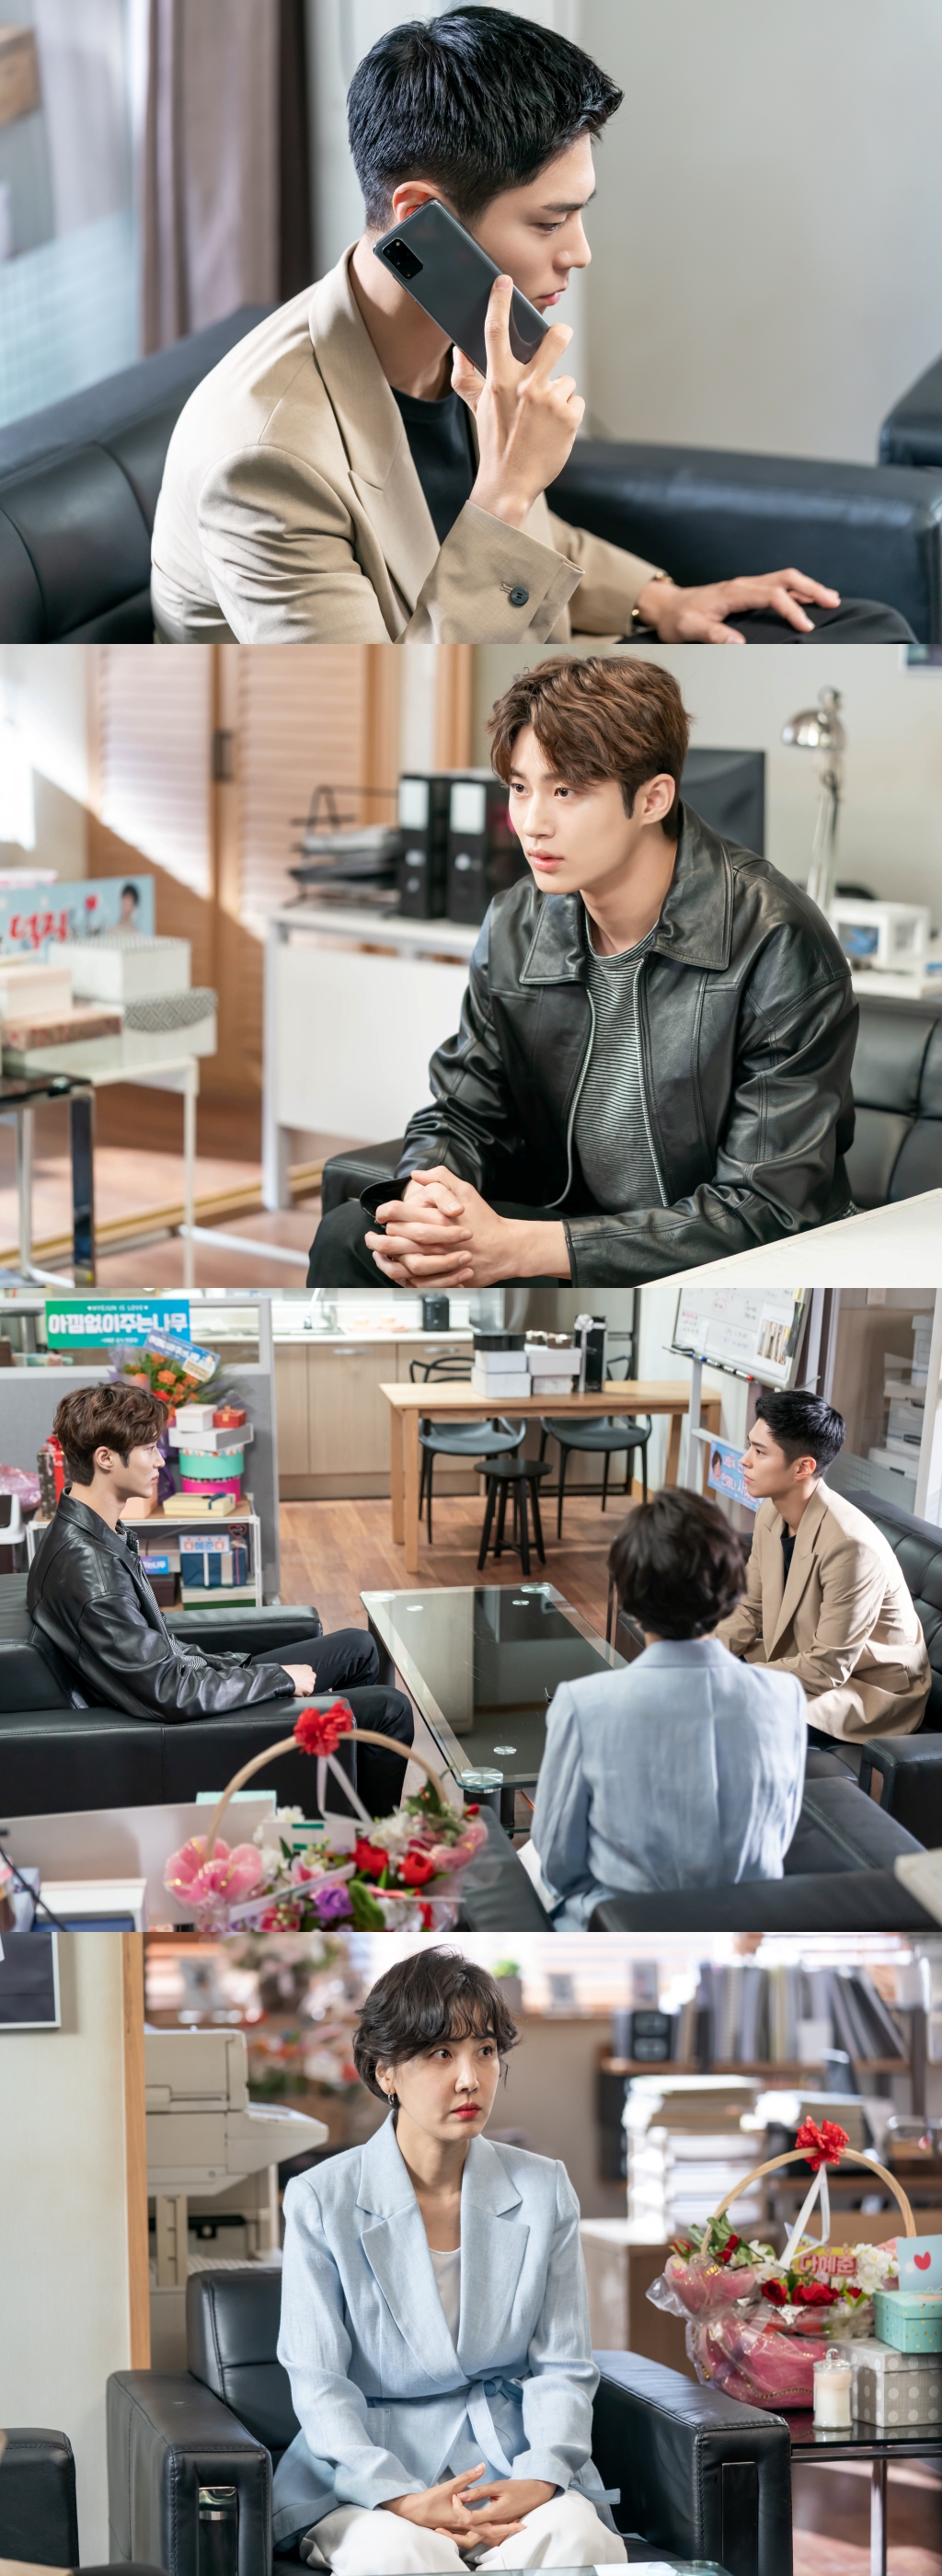 Record of Youth Park Bo-gum, Byeon Wooseok face offTVNs monthly drama Record of Youth (directed by Ahn Gil-ho, playwright Ha Myung-hee, production fan entertainment, studio dragon) released the images of Sangers Sa Hye-joon (Park Bo-gum) and Byeon Wooseok on the 12th.The day I have never seen before, I am curious about the nerves.In the last broadcast, Sa Hye-joon won the best performance award by succeeding in the drama Return of the King.Sa Hye-joons unstoppable Shus move, which has achieved Actors dream over the cold reality, has given a thrilling Qatarsis, but unexpected trials have come.The news of Charlie Chung (Lee Seung-jun)s death, which was taken by Sa Hye-joon at the moment of enjoying happiness, amplified his curiosity about future development.In the meantime, the tension of Champon Entertainment is caught, further heightening the sense of Danger.The hard face of Sa Hye-joon, who is talking to someone, makes him guess the unusual incident that came to him.With the silence flowing, the eye-catching of Sa Hye-joon and Won Hae-hyo Day pulls the tension tight. Manager Lee Min-jae (Shin Dong-mi) is also confused.Sa Hye-joon and Won Hae-hyo, who supported each other more than anyone else while growing the same dream, are drawing attention to what changes will come to the two youths who face the crossroads of different Choices.In the 11th broadcast on the 12th, the overcoming period of Sa Hye-joon, who faced an unexpected trials, is drawn.Charlie Justice A helper who is not welcomed by Sa Hye-joon, who is suffering from rumors that can not be controlled by death, will appear.Record of Youth production team said, Please pay attention to whether you can protect your dreams, love and friendship in your own Danger.Choices of Sa Hye-joon, who does not lose his conviction, will have another impression and Qatarsis. 